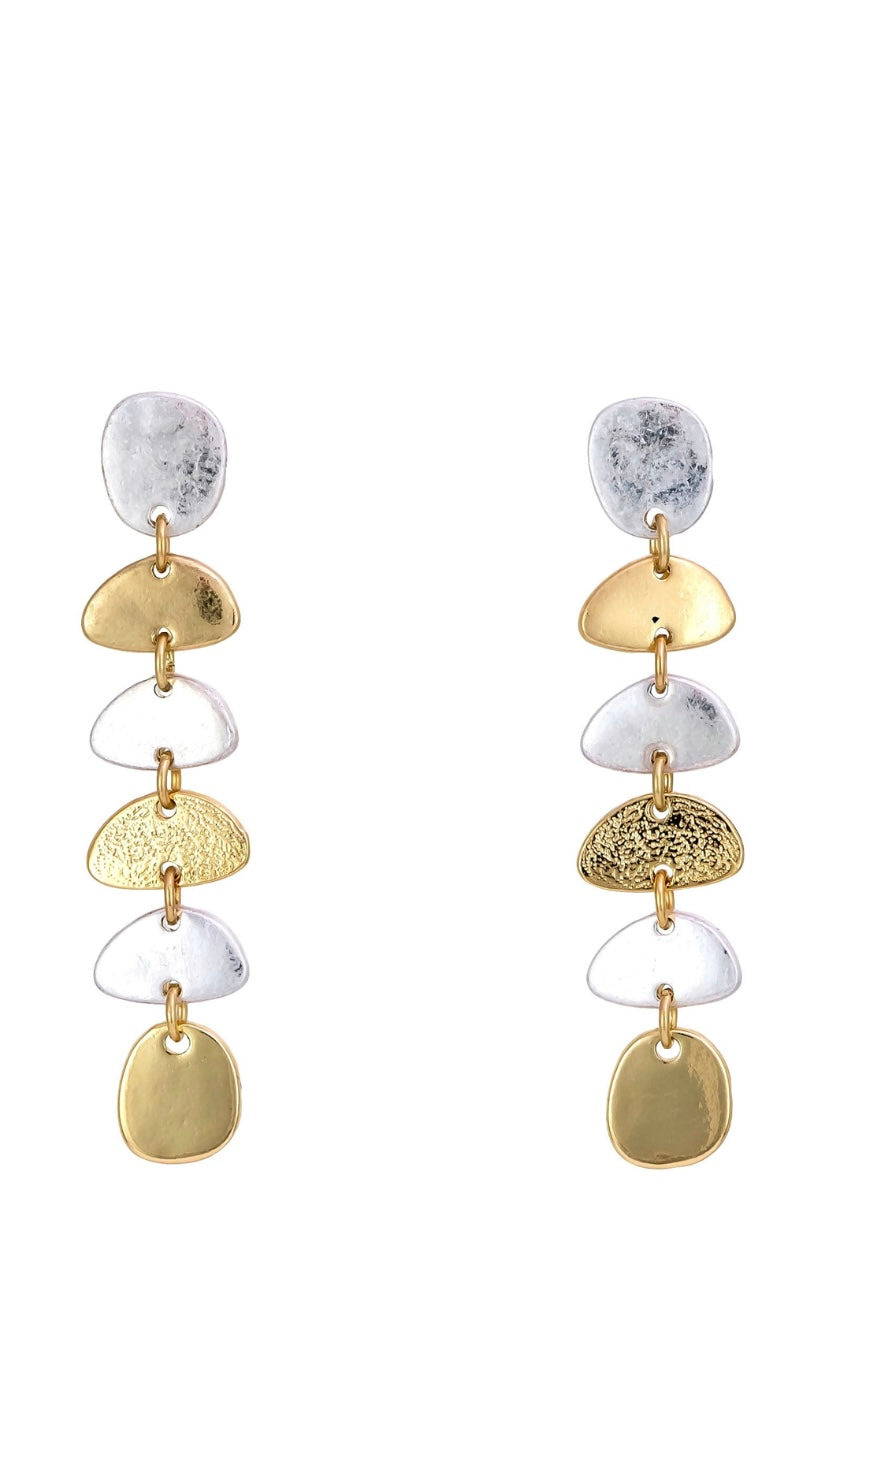 Earring Chic Two Tone Hammered Gold & Silver Disc Drop Post Earrings